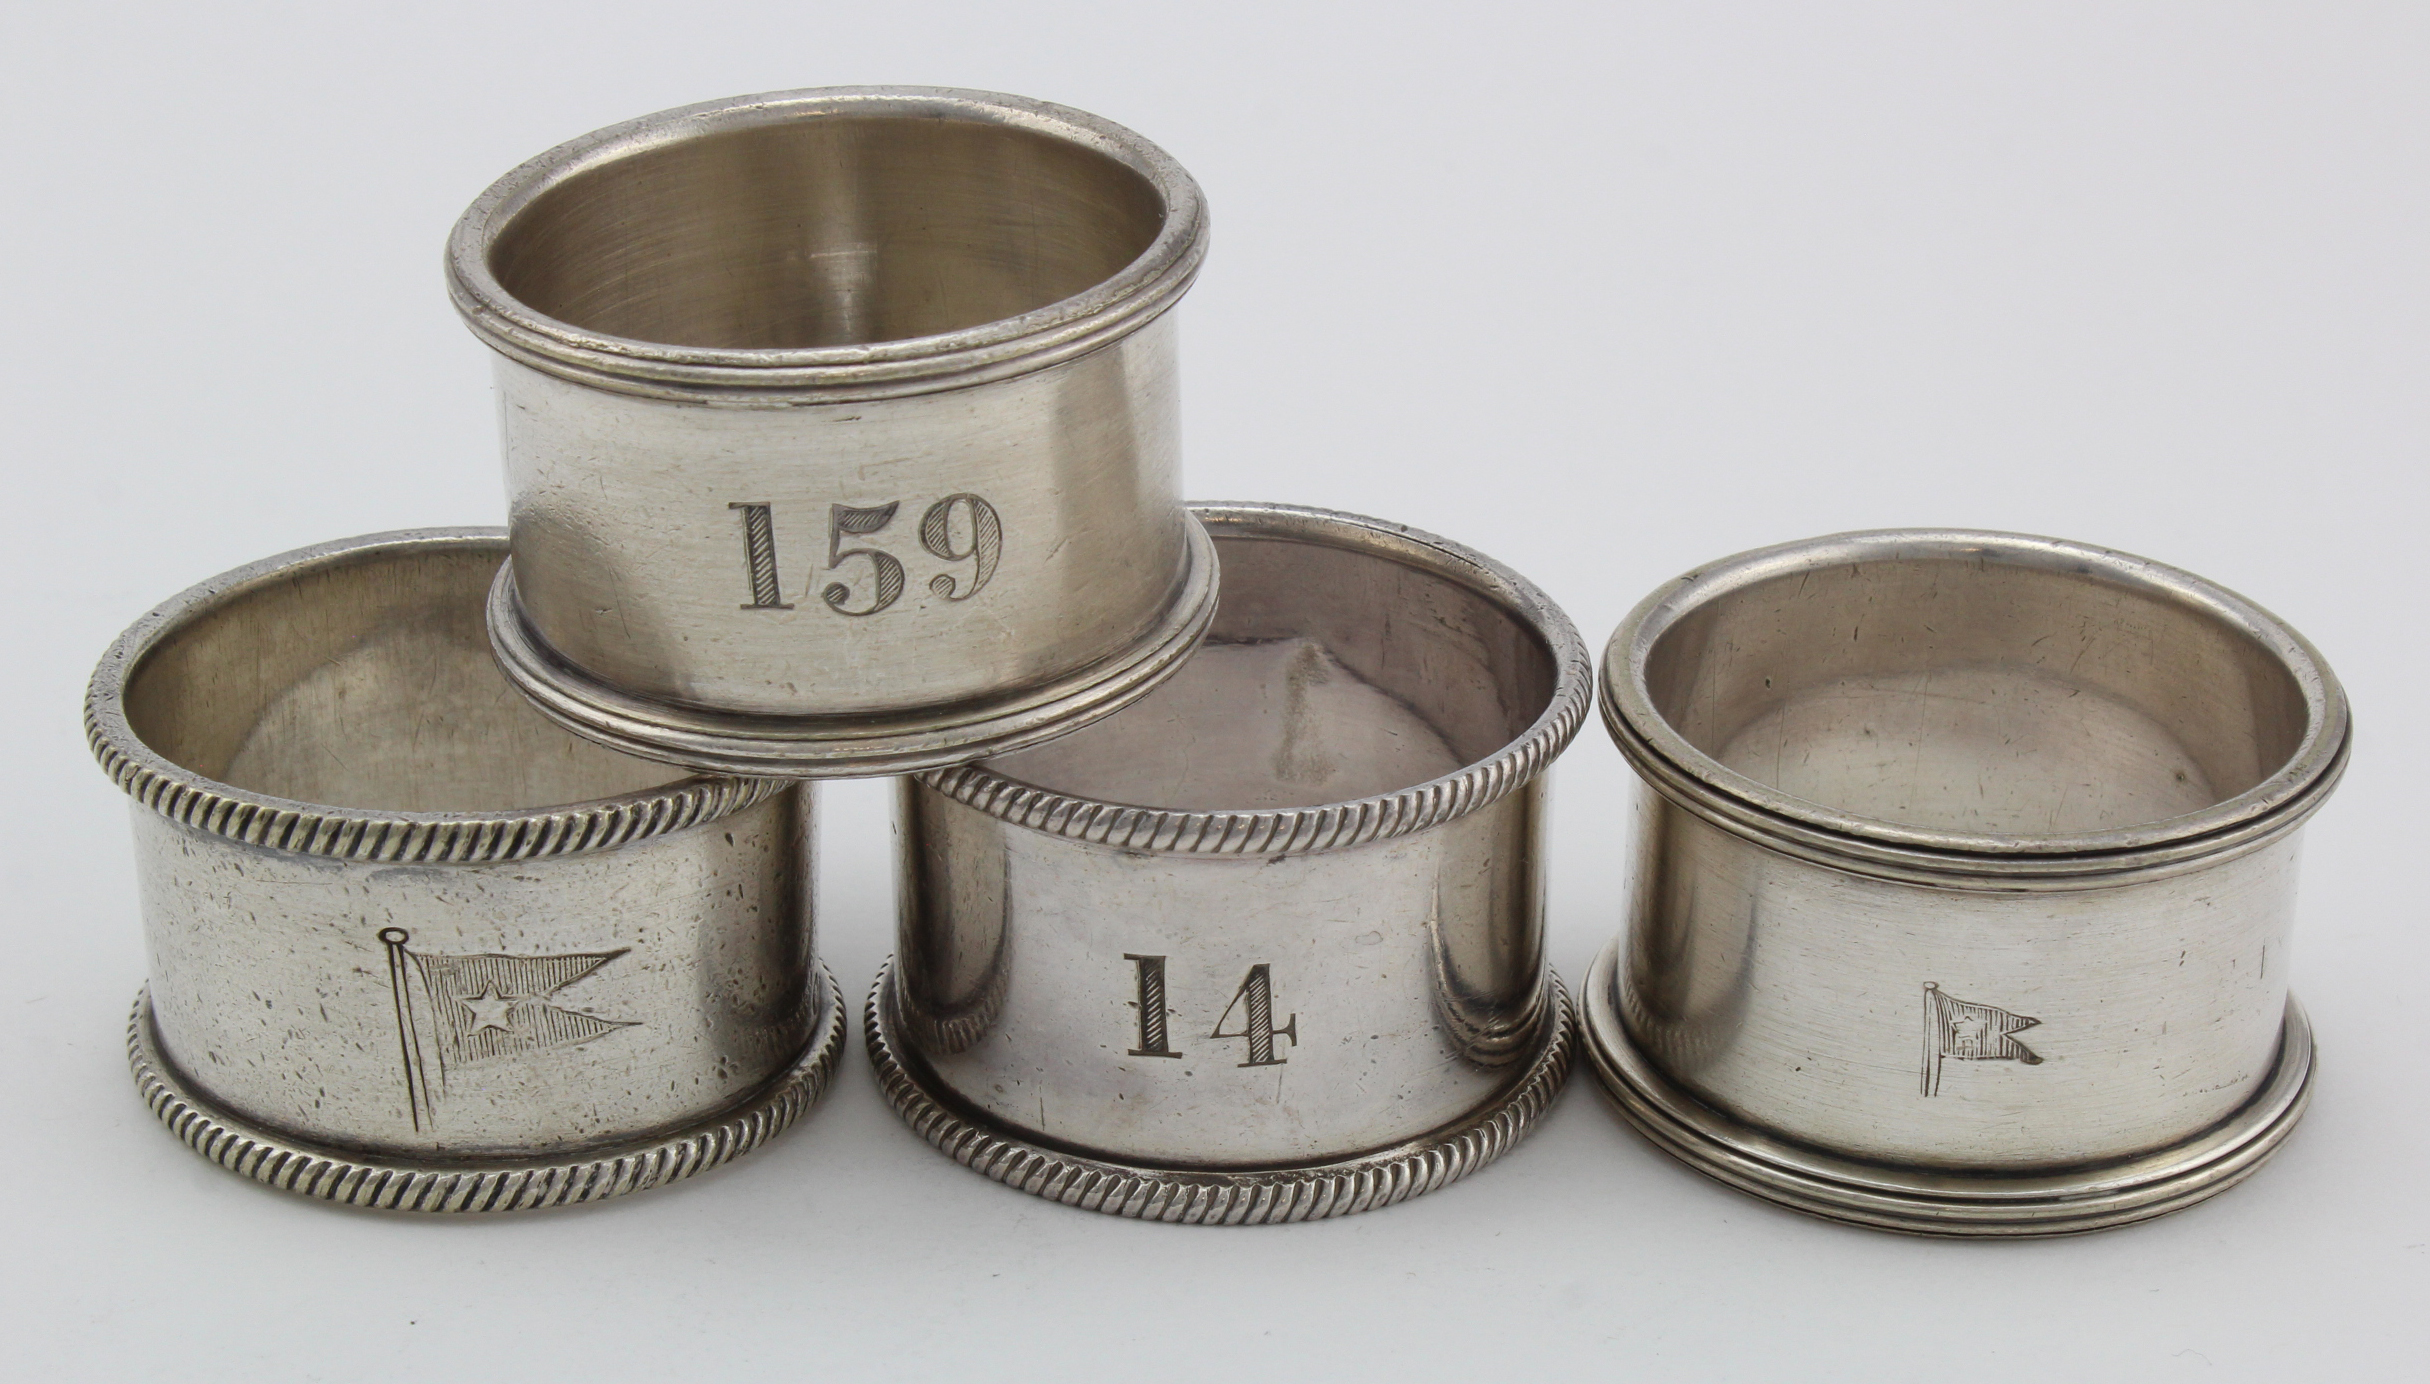 Silver plated White Star Line napkin ring, with engraved flag emblem to side, together with three